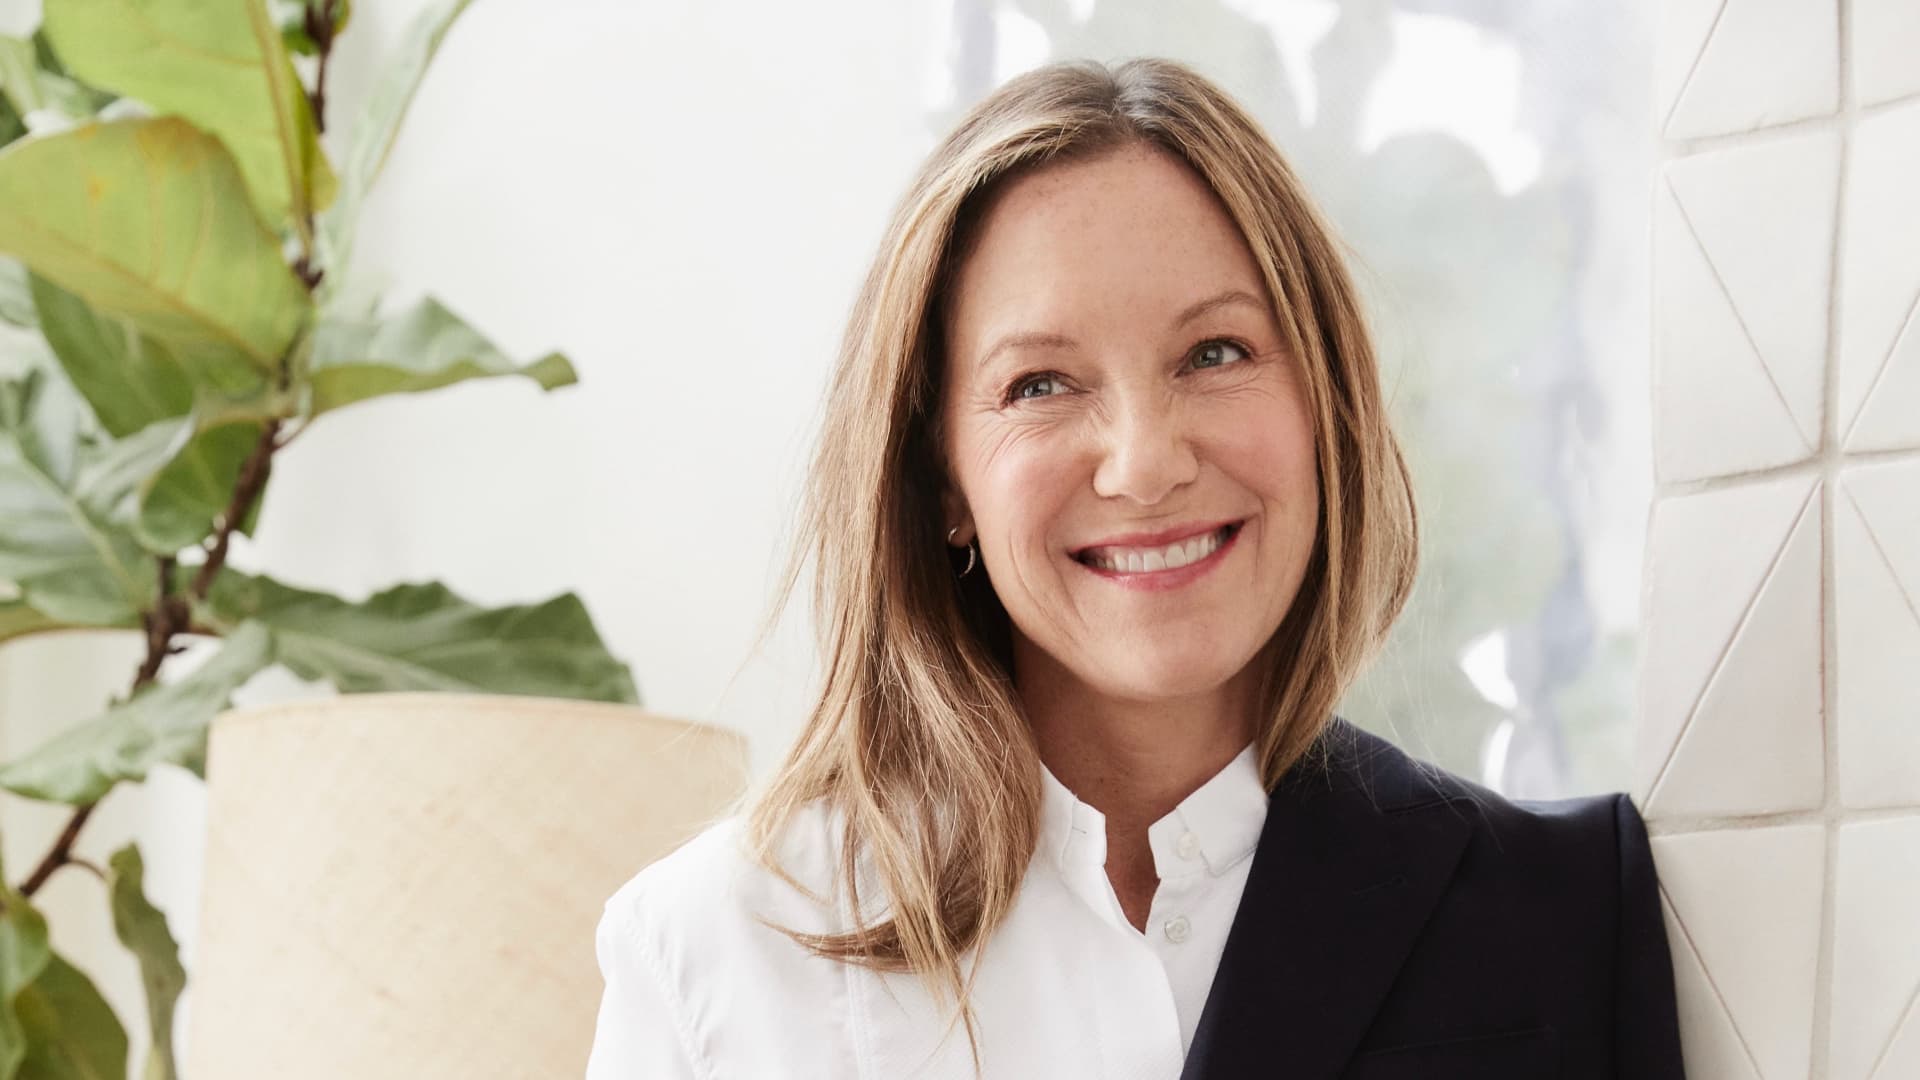 Beautycounter’s founder sold the $1 billion business and lost her job—now she’s back as CEO: 'Failure is not an choice'